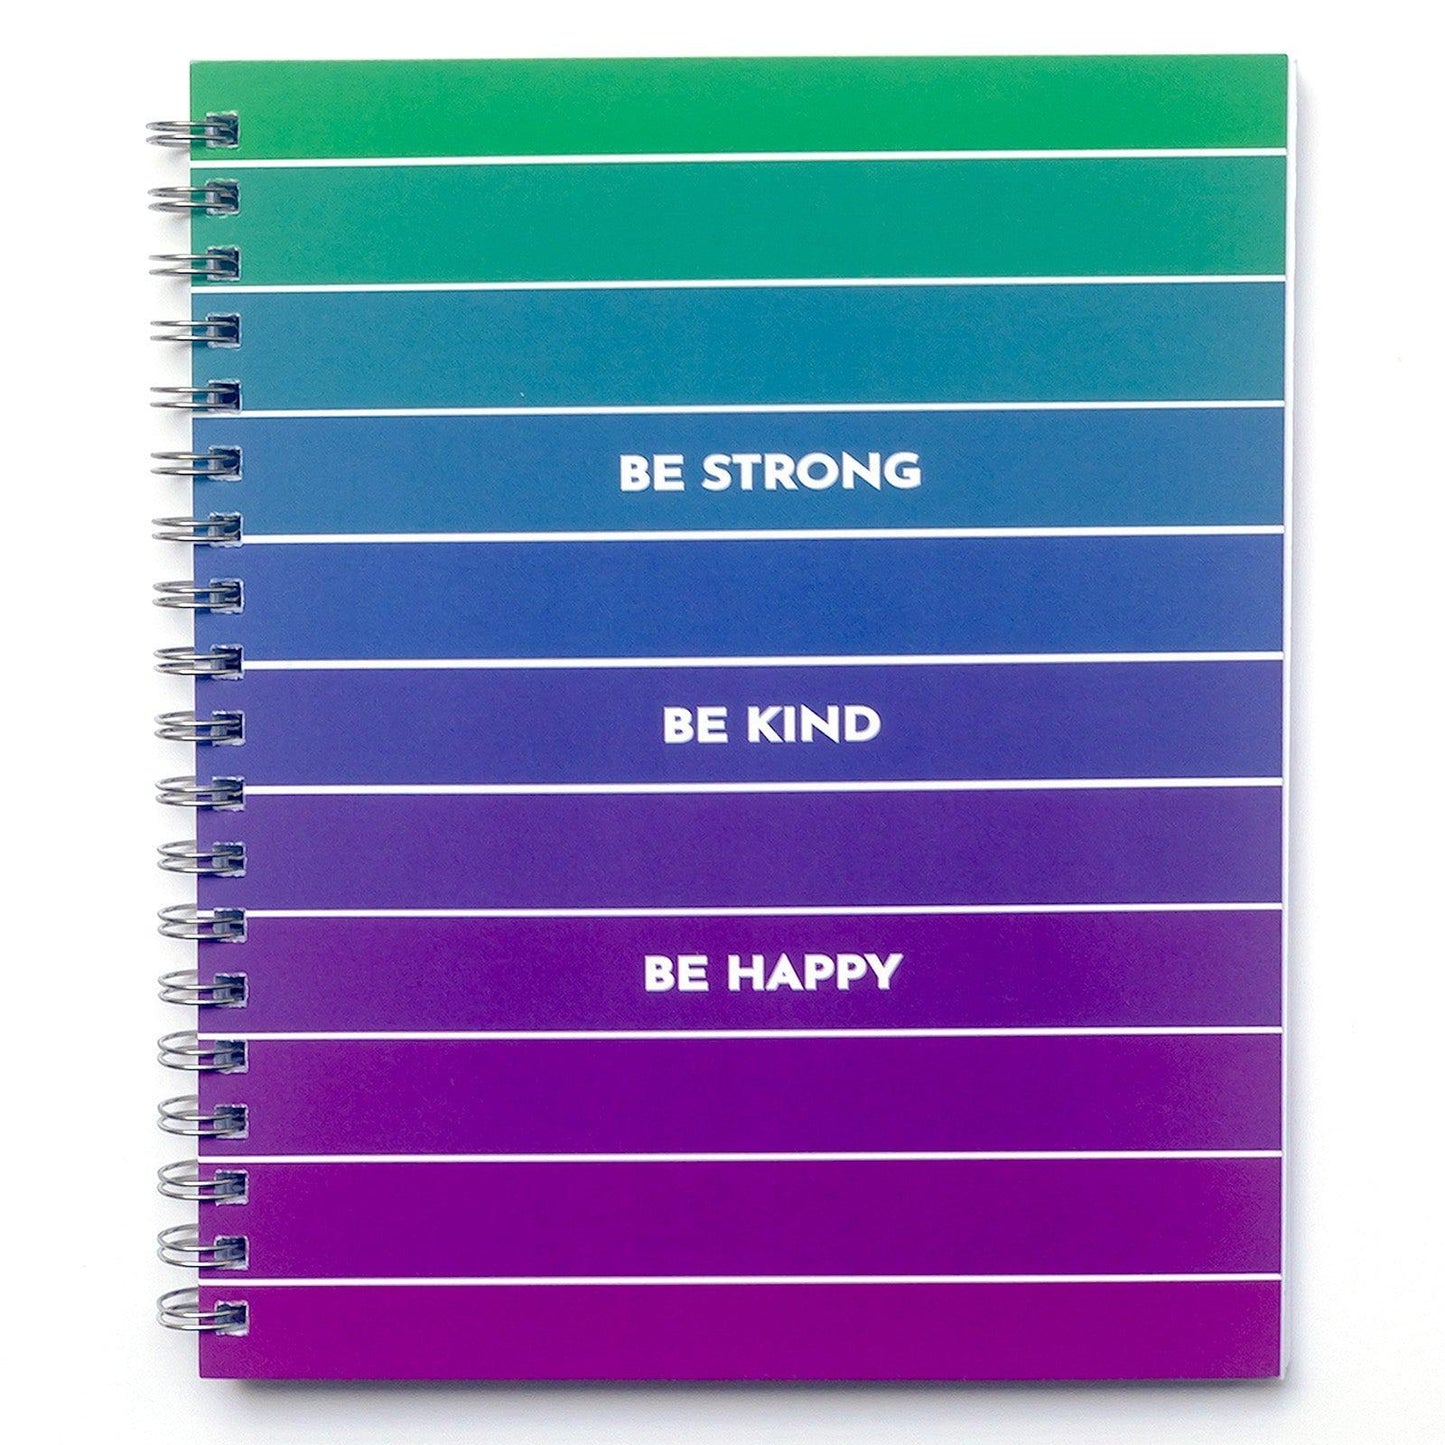 Be Strong Be Kind Be Happy Journal - Green blue purple ombre with words Be Strong, Be Kind, Be Happy on front cover